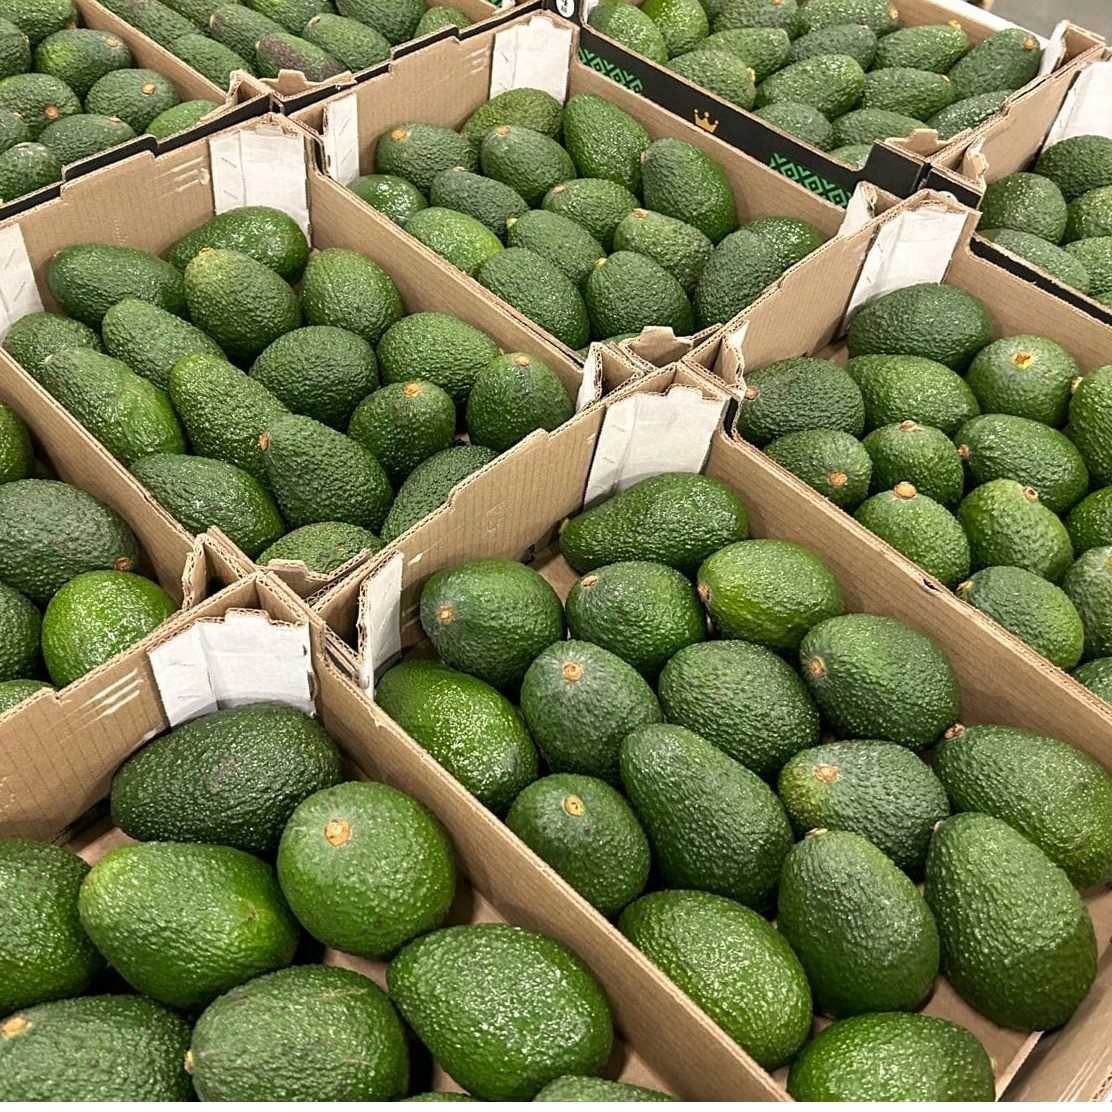 I am looking for Hass Avocado